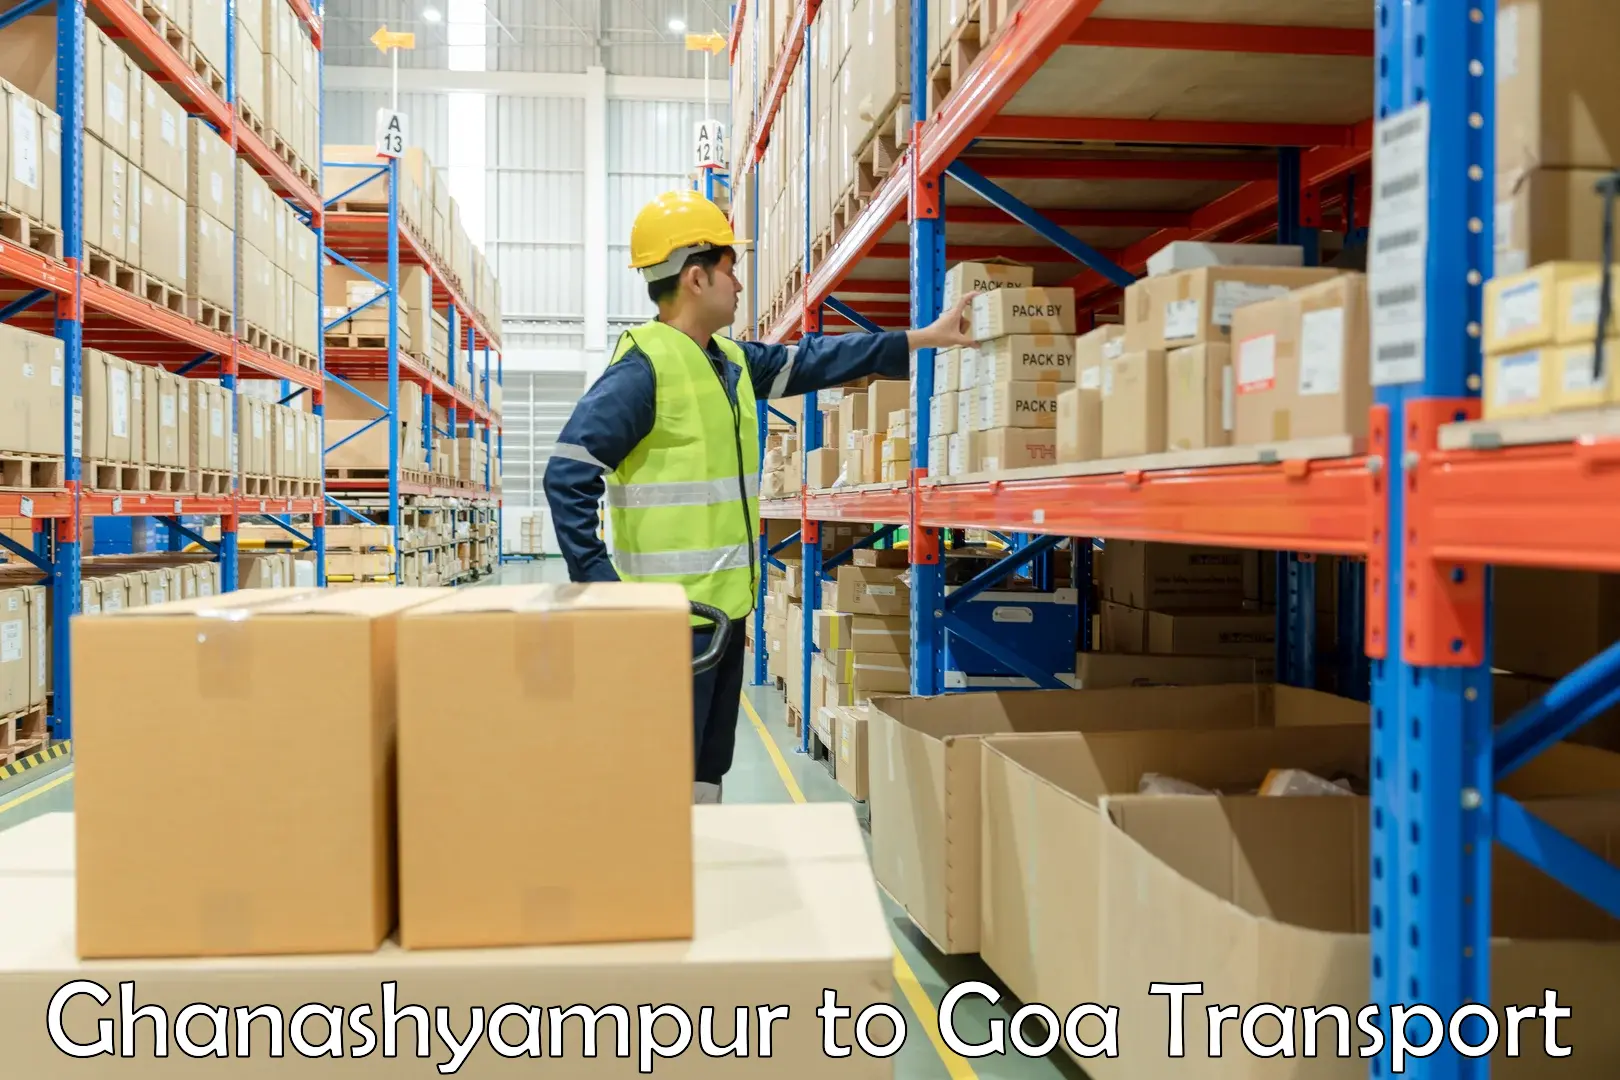 Pick up transport service in Ghanashyampur to Mormugao Port